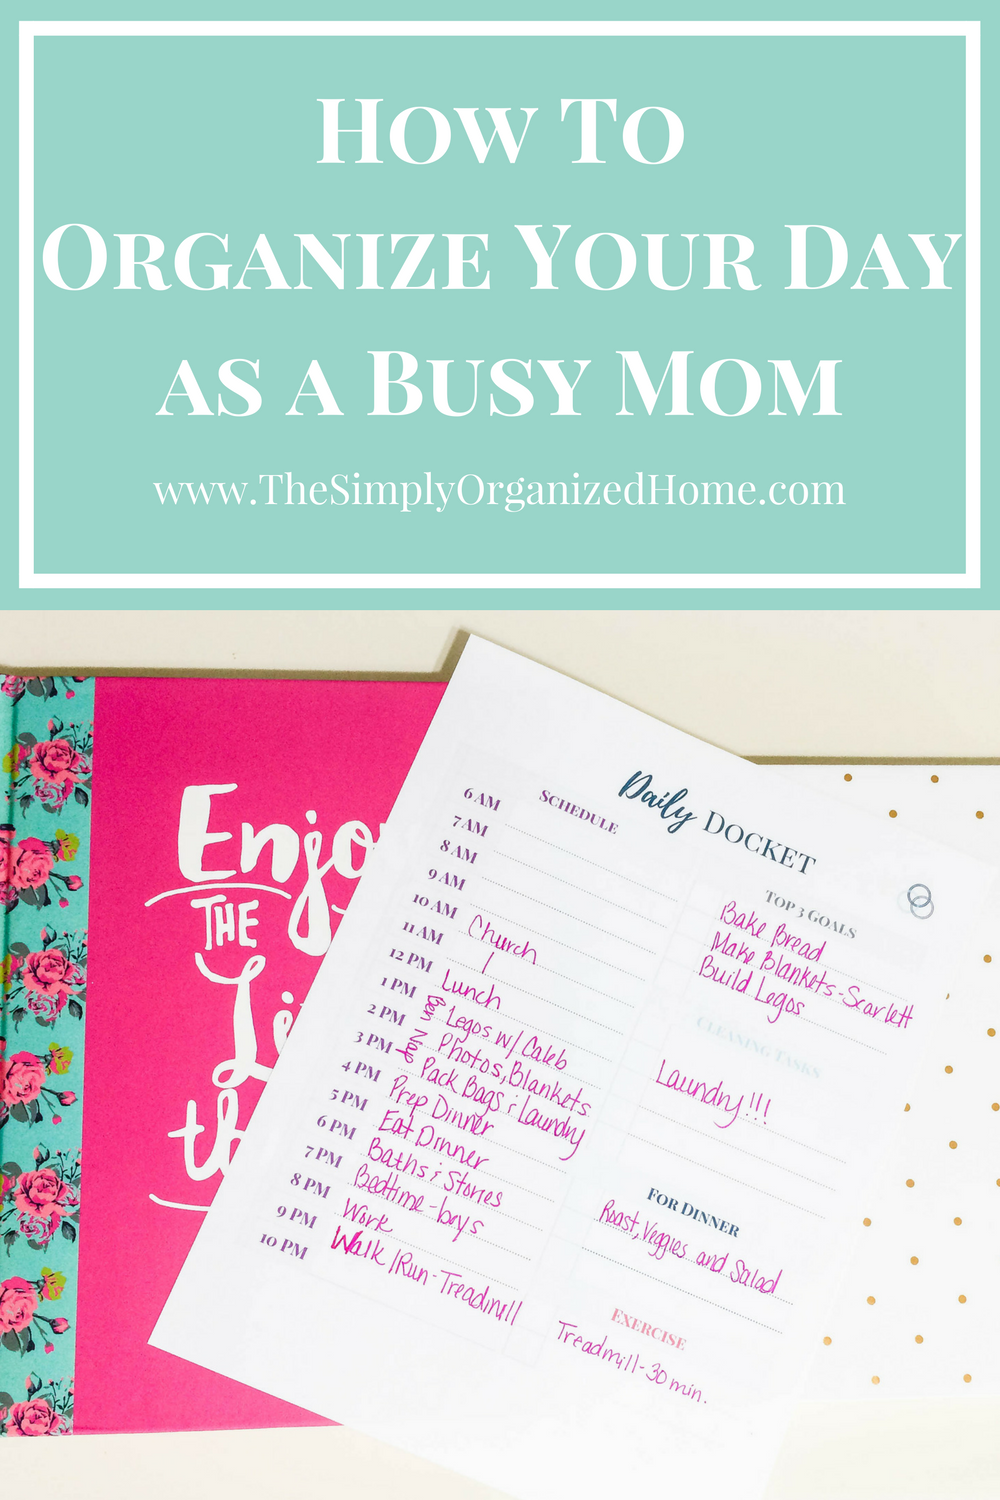 organize-your-day-as-a-busy-mom-the-simply-organized-home